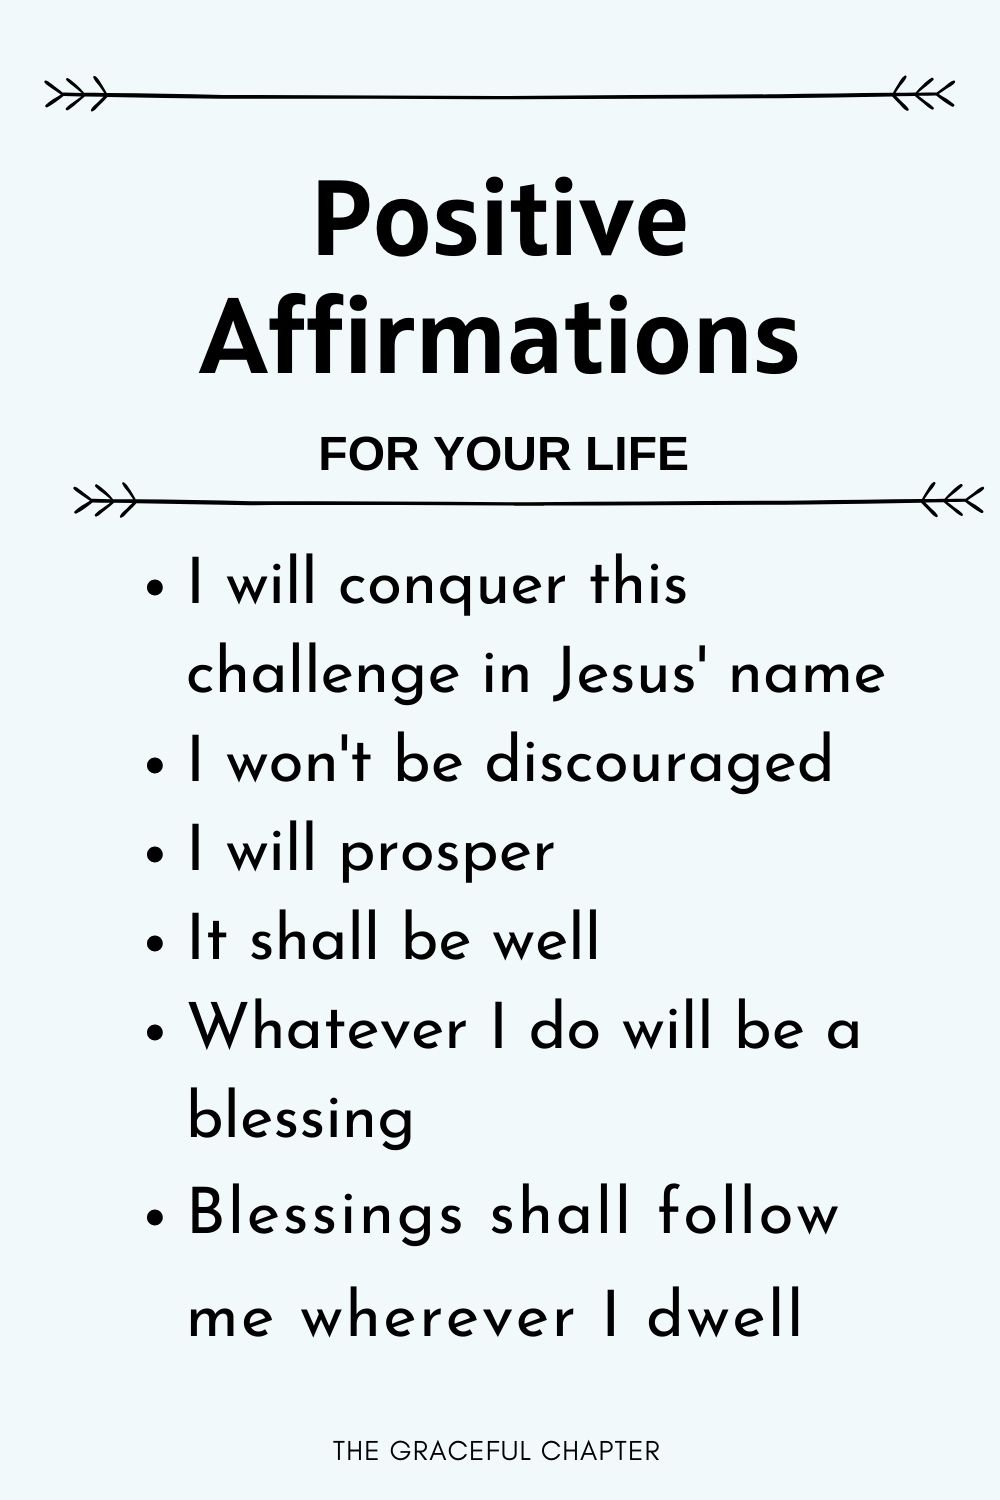 Positive affirmations for life